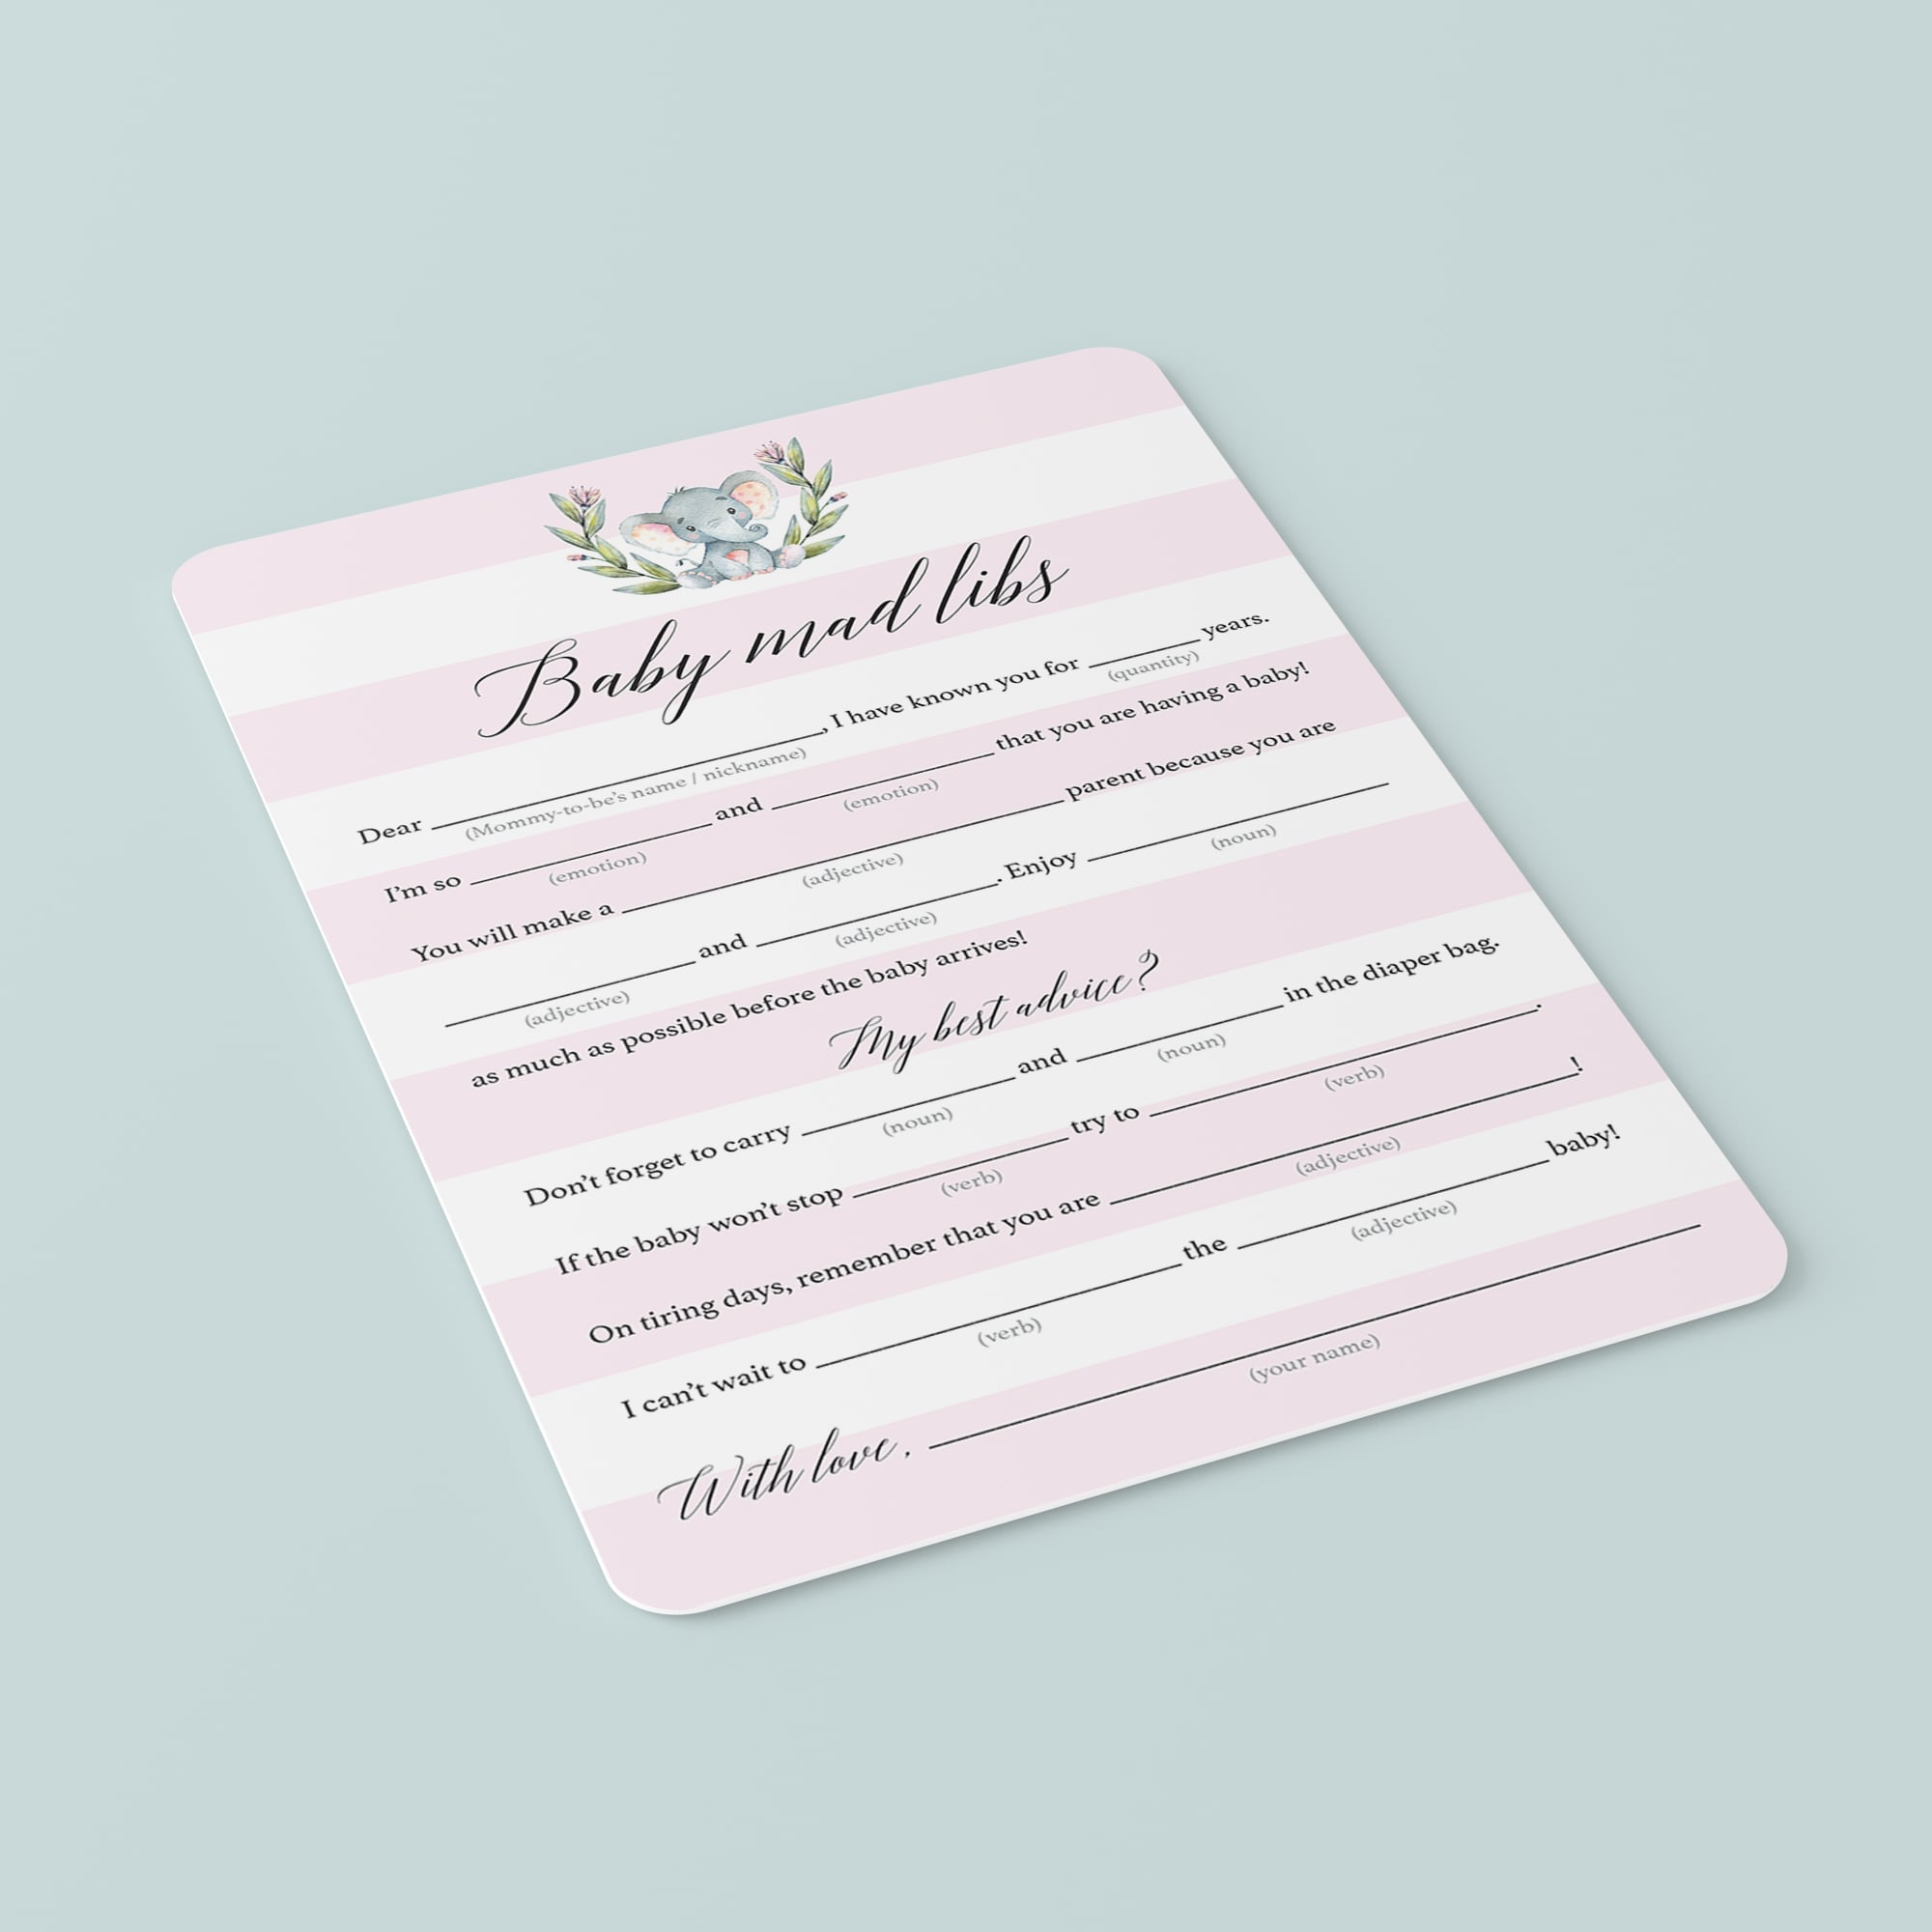 Baby shower mad libs game for girl party by LittleSizzle